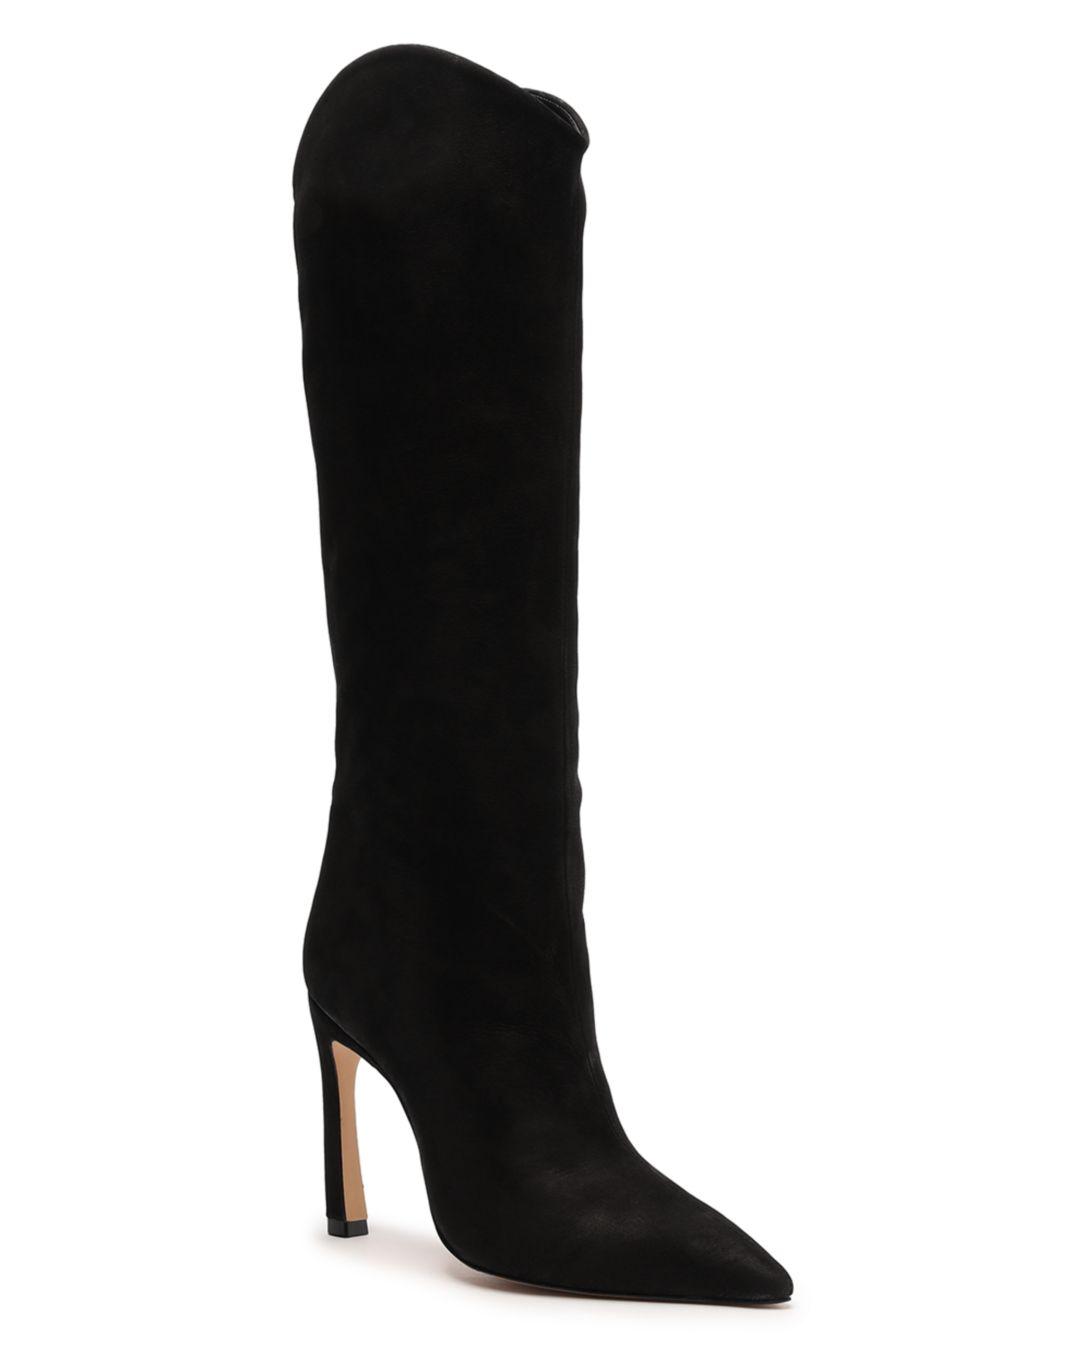 SCHUTZ SHOES Maryana Sculpt Pointed Toe High Heel Boots in Black | Lyst